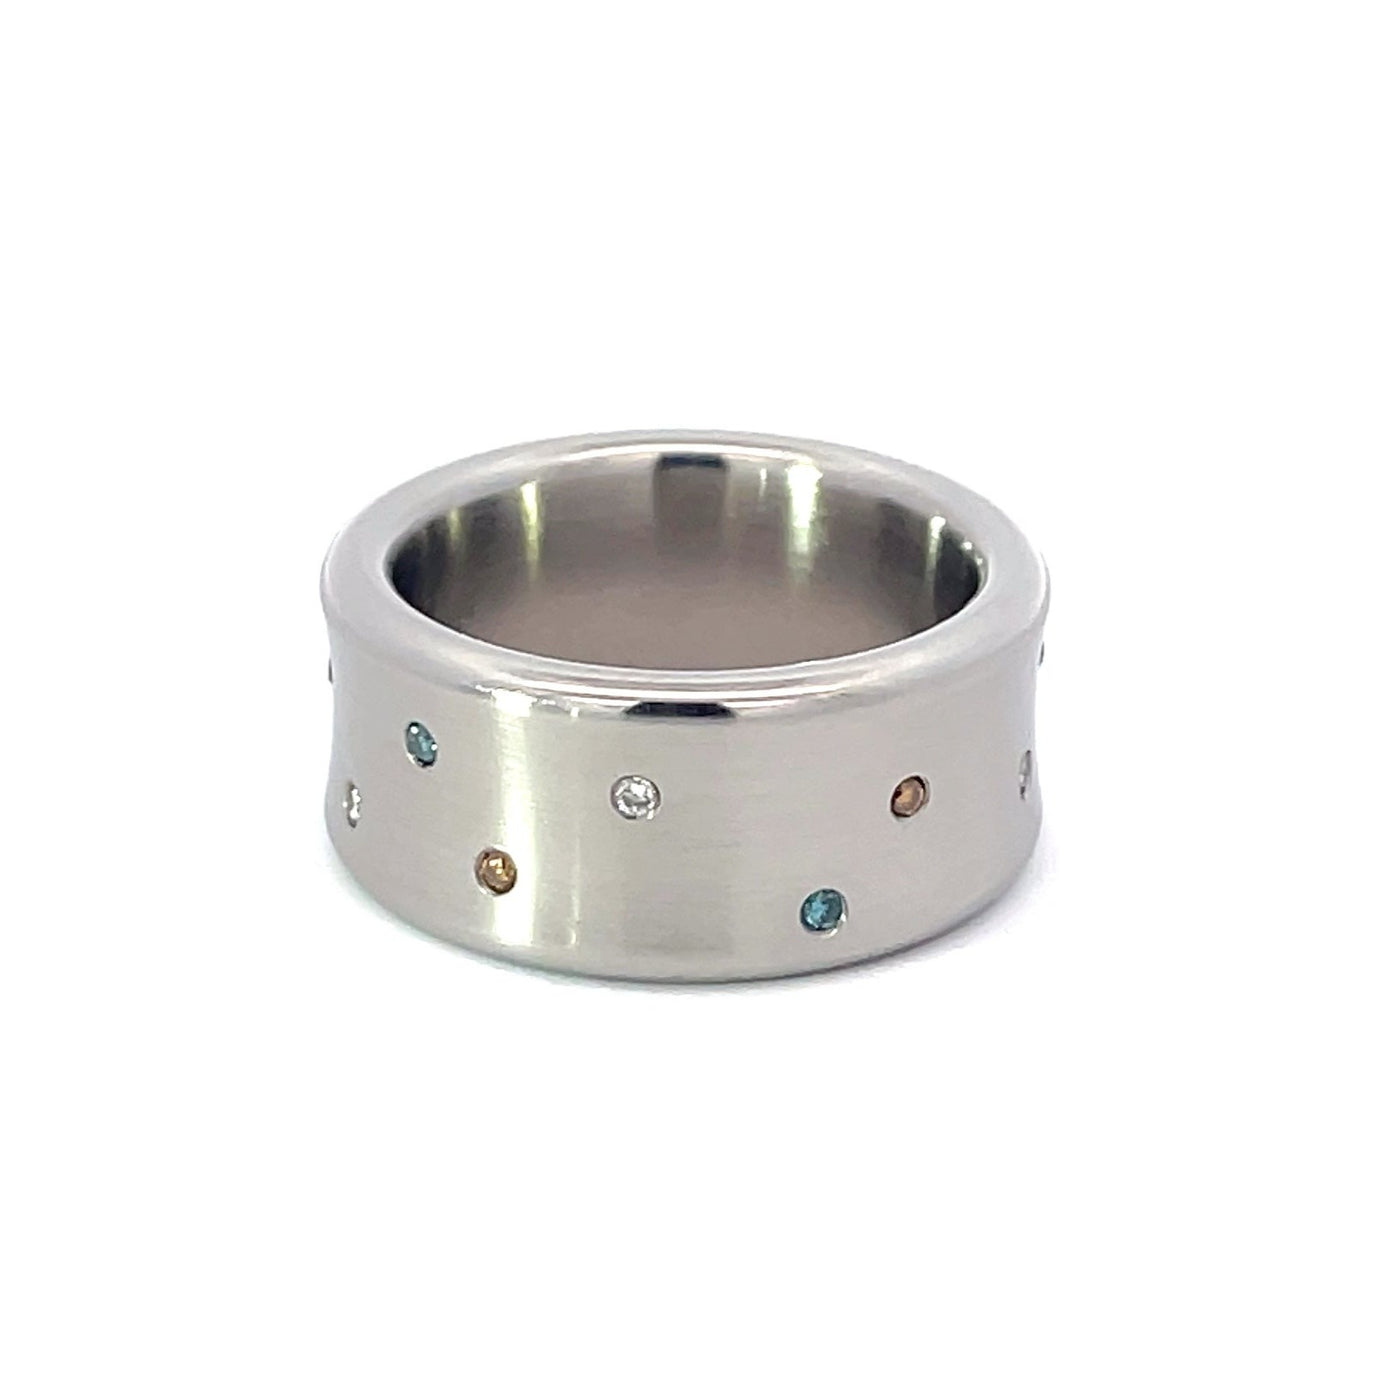 10mm Satin Stainless Steel Coloured Diamond Scatter Ring - Size N 1/2